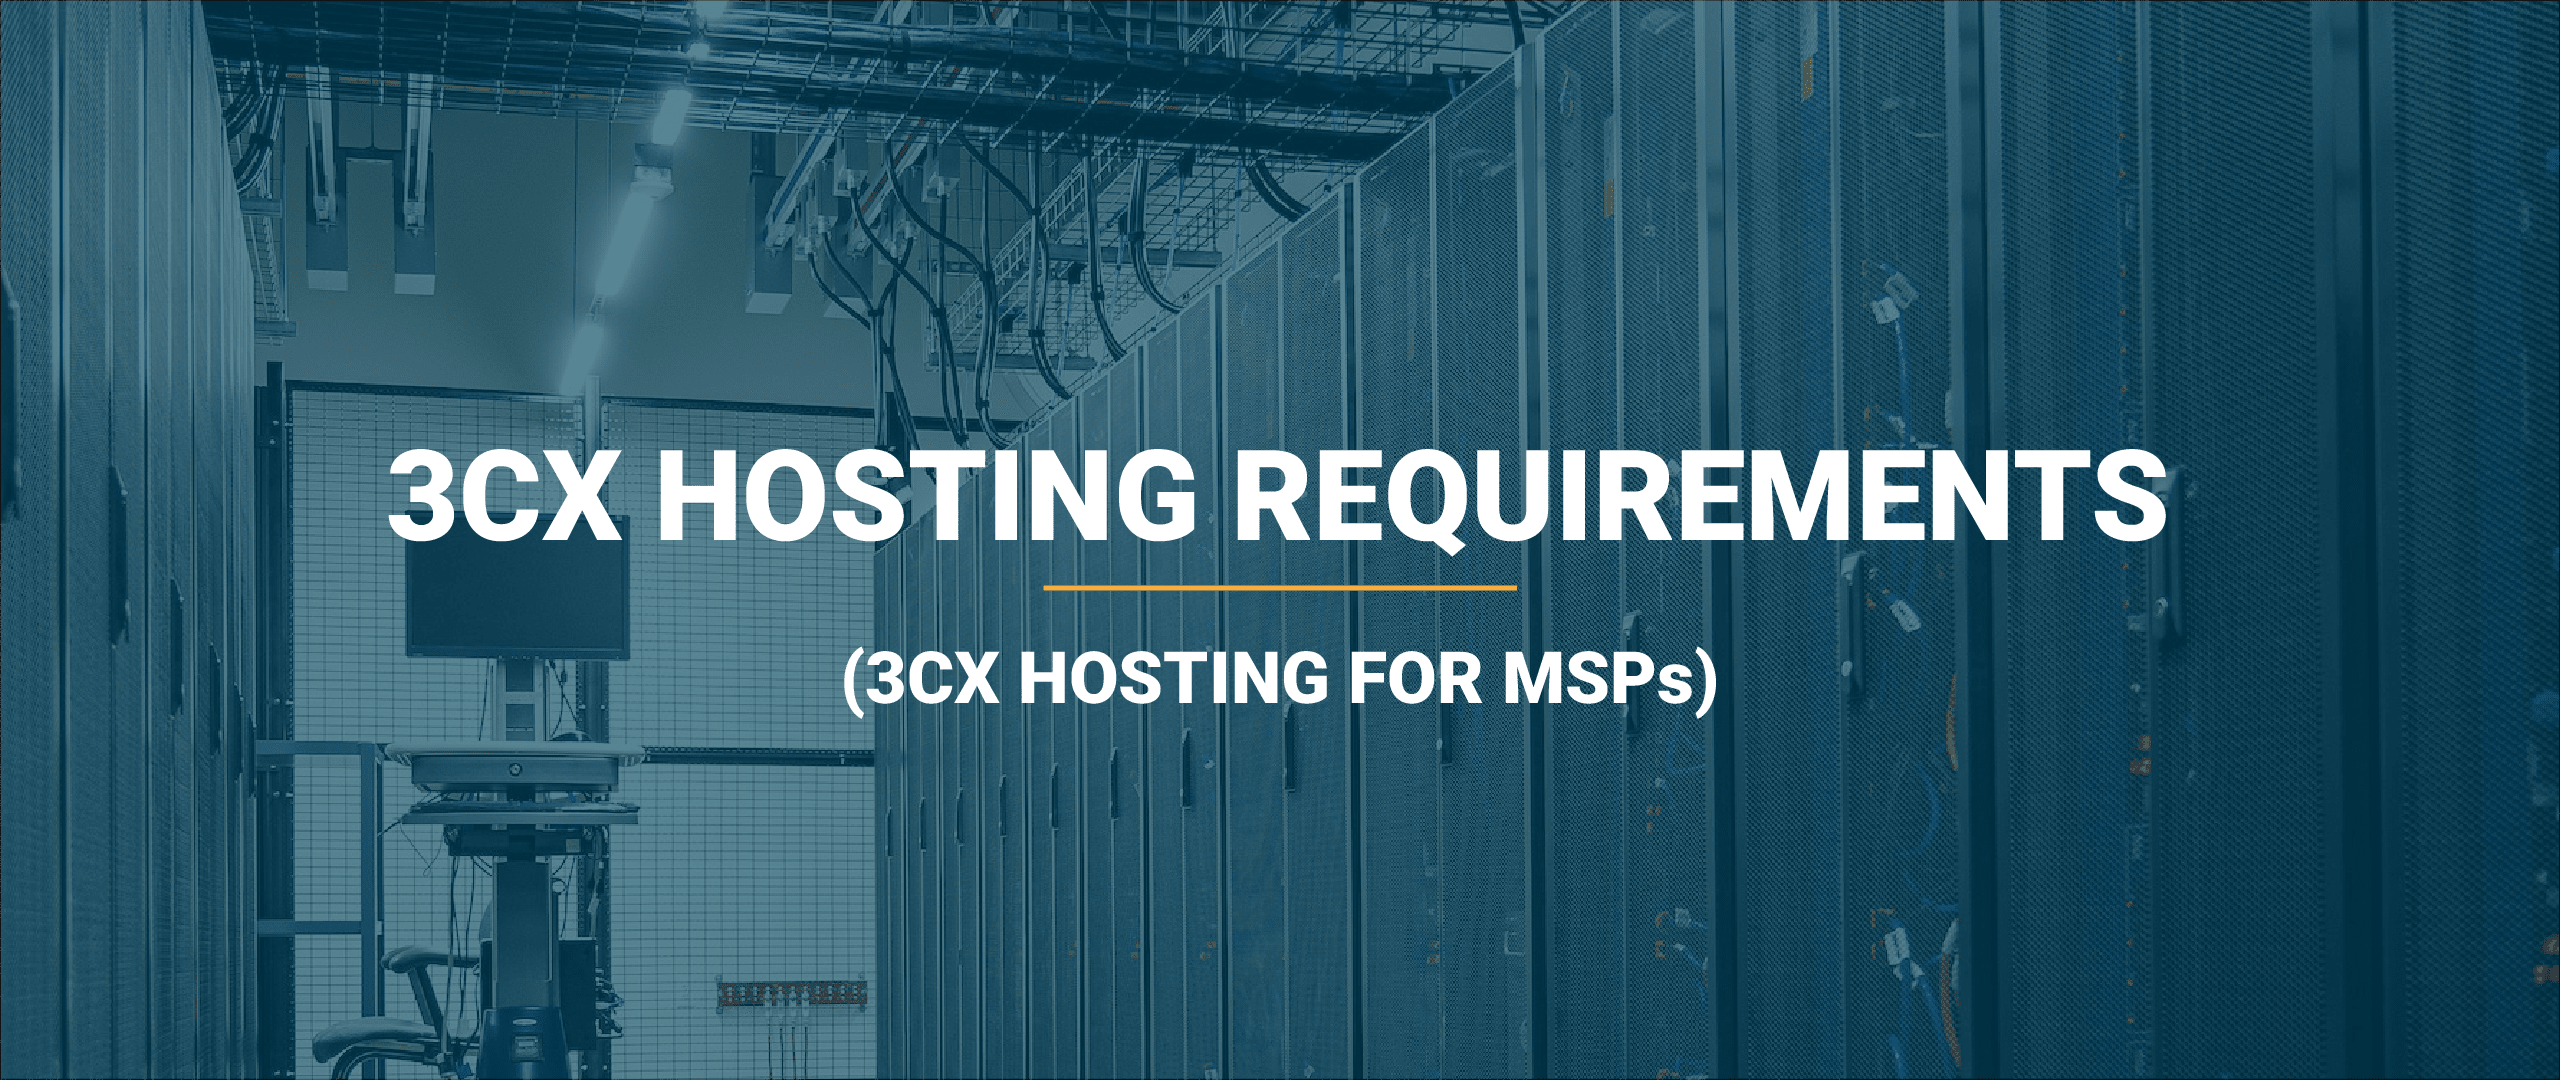 3CX Hosting Requirements